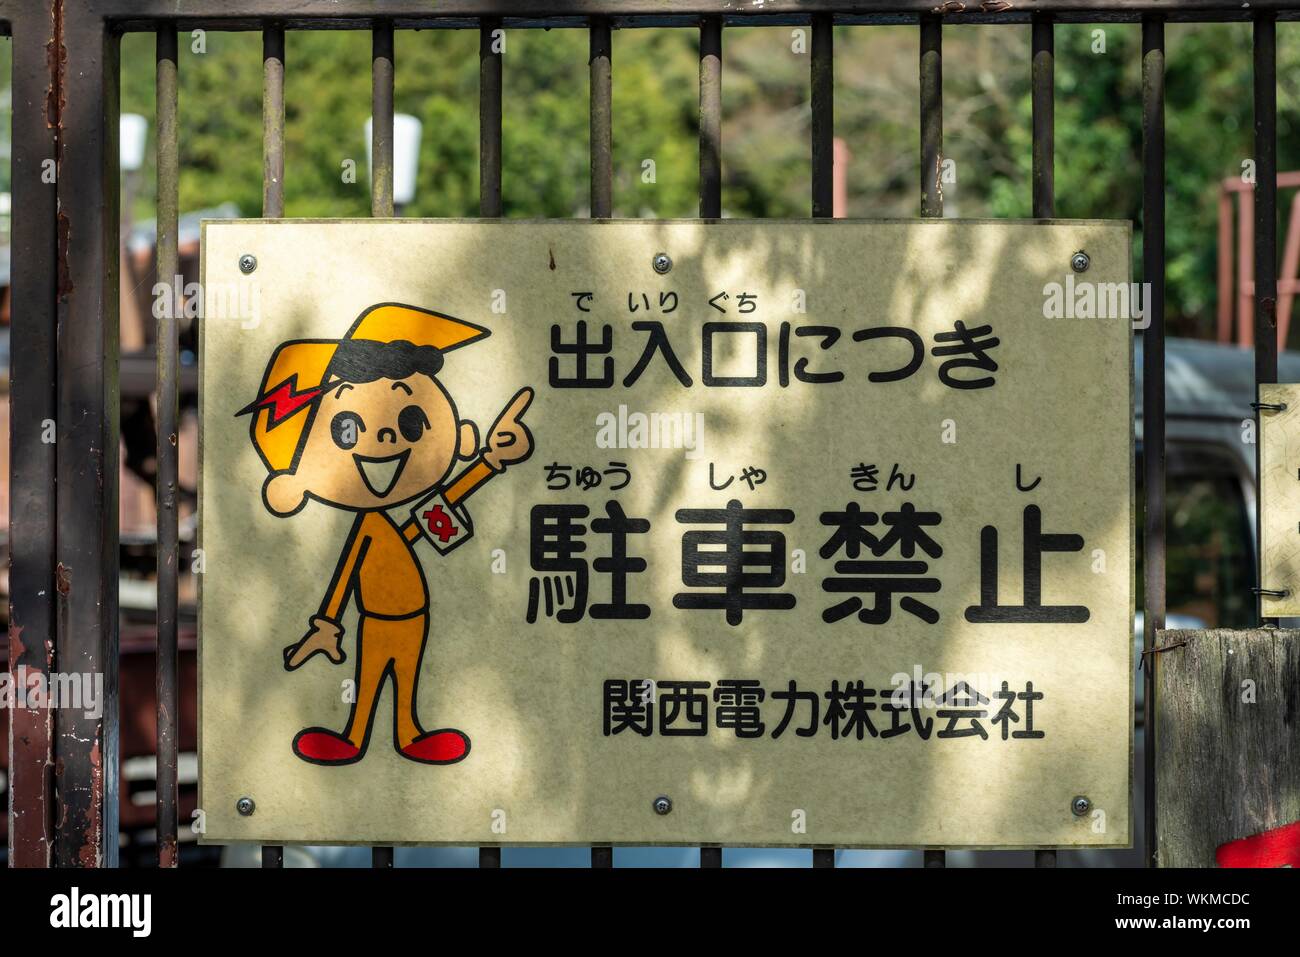 Attention high voltage, sign in Japanese, Kyoto, Japan Stock Photo